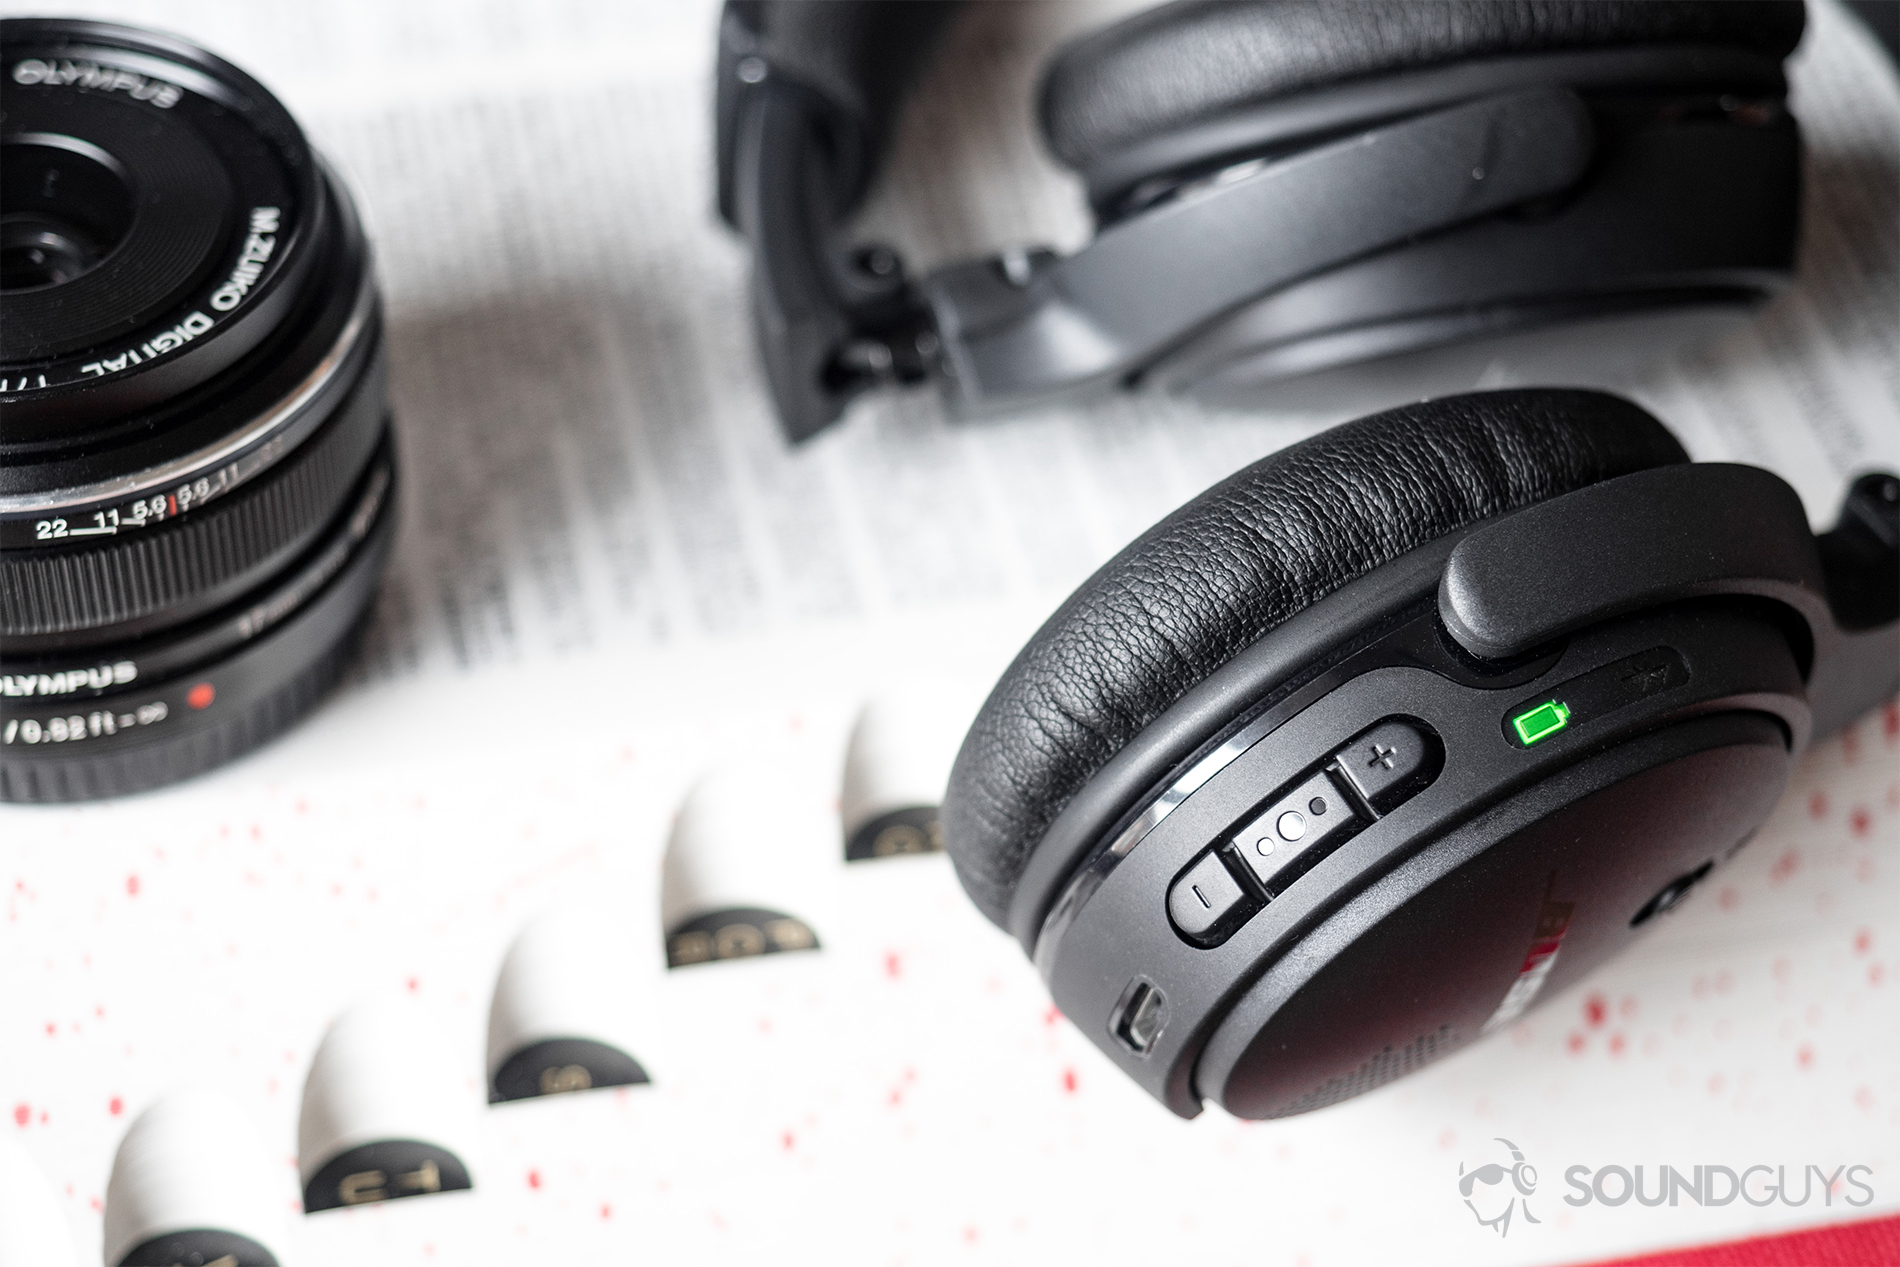 The battery life exceeds expectations by 30 minutes to a full hour, and the LED indicator informs listeners of the battery level. Pictured: The back of the right ear cup of the Bose On-Ear Wireless headphones with the battery LED lit up (green) to indicate that it is fully charged. The buttons (volume up, down, and multi-function) are also visible. The headphones are on an open dictionary with an Olympus M. Zuiko lens on the left side of the frame.